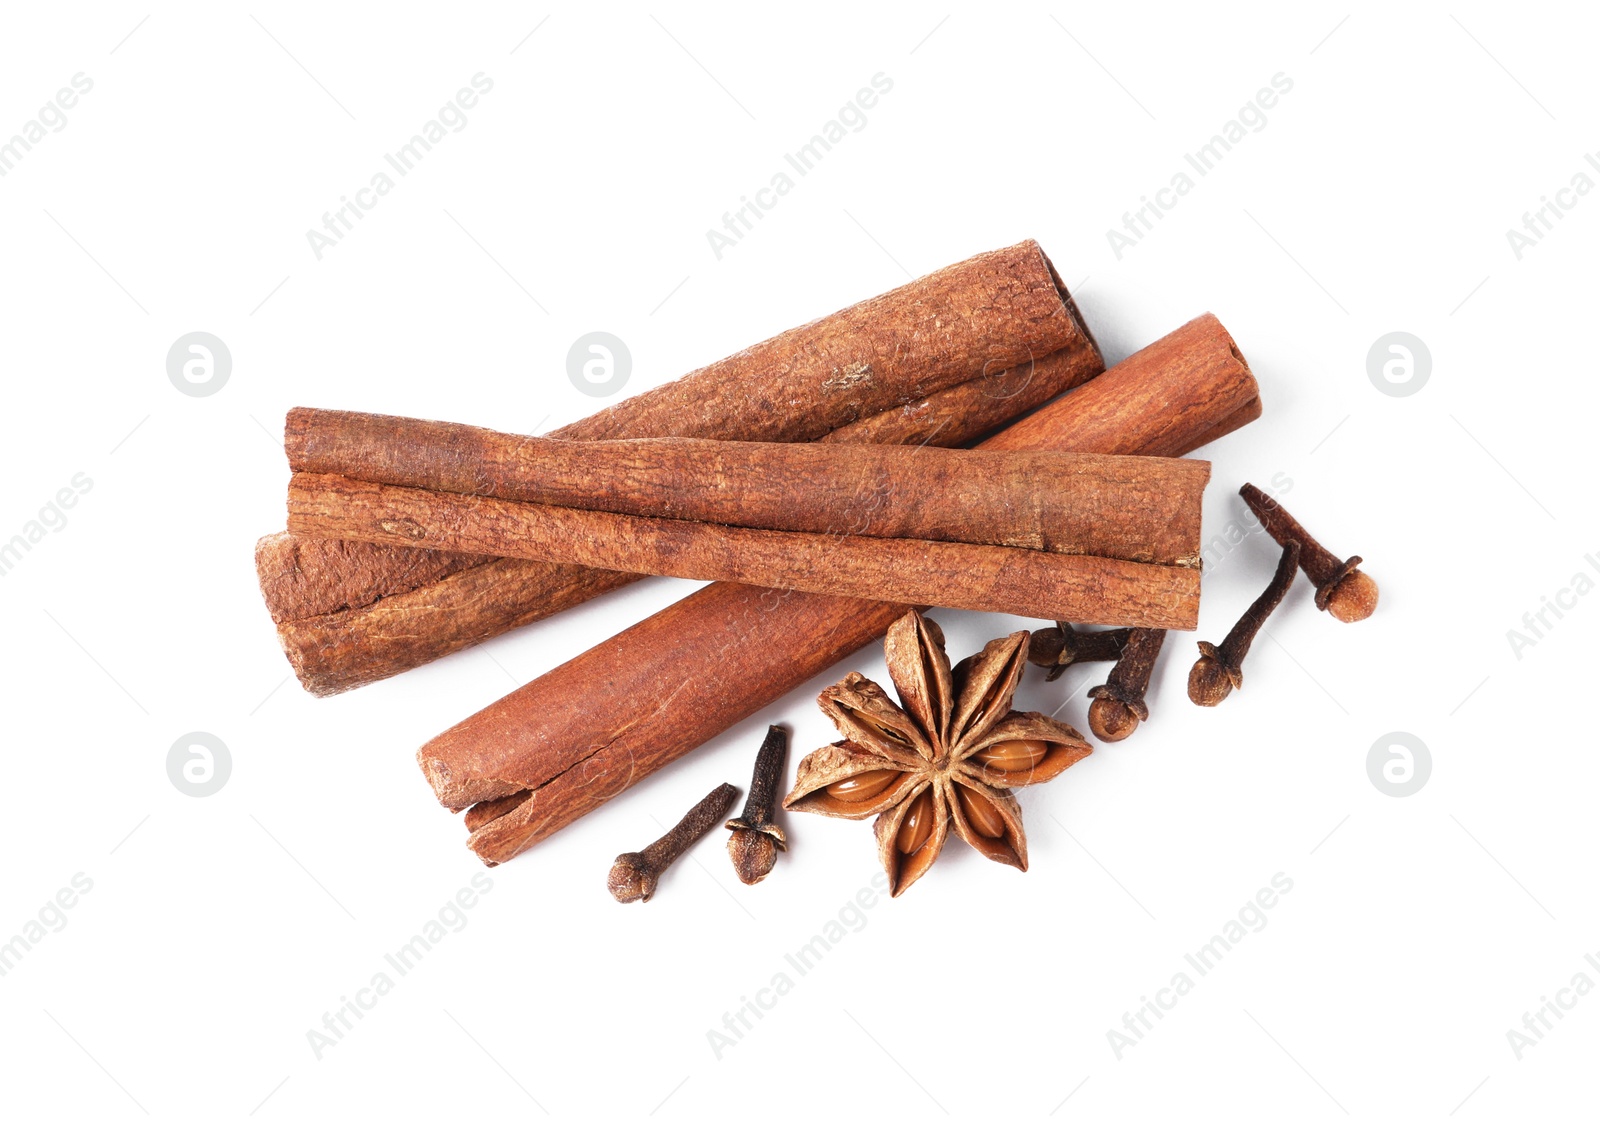 Photo of Different spices on white background, top view